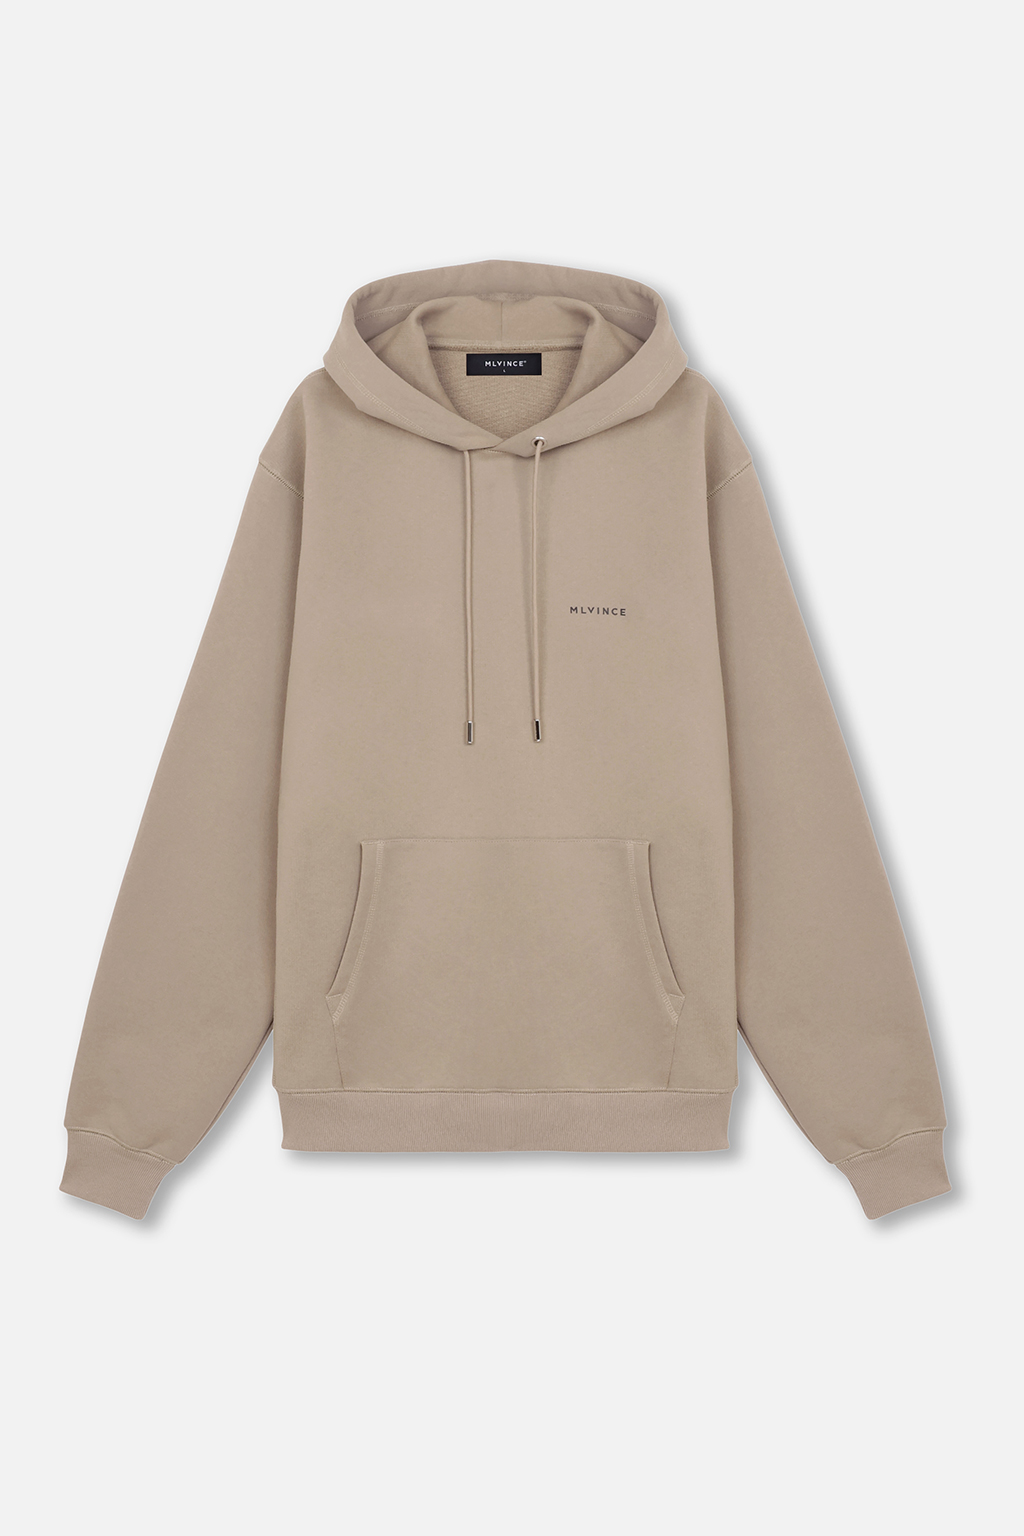 HEAVY WEIGHT CLASSIC LOGO HOODY - SAND - MLVINCE